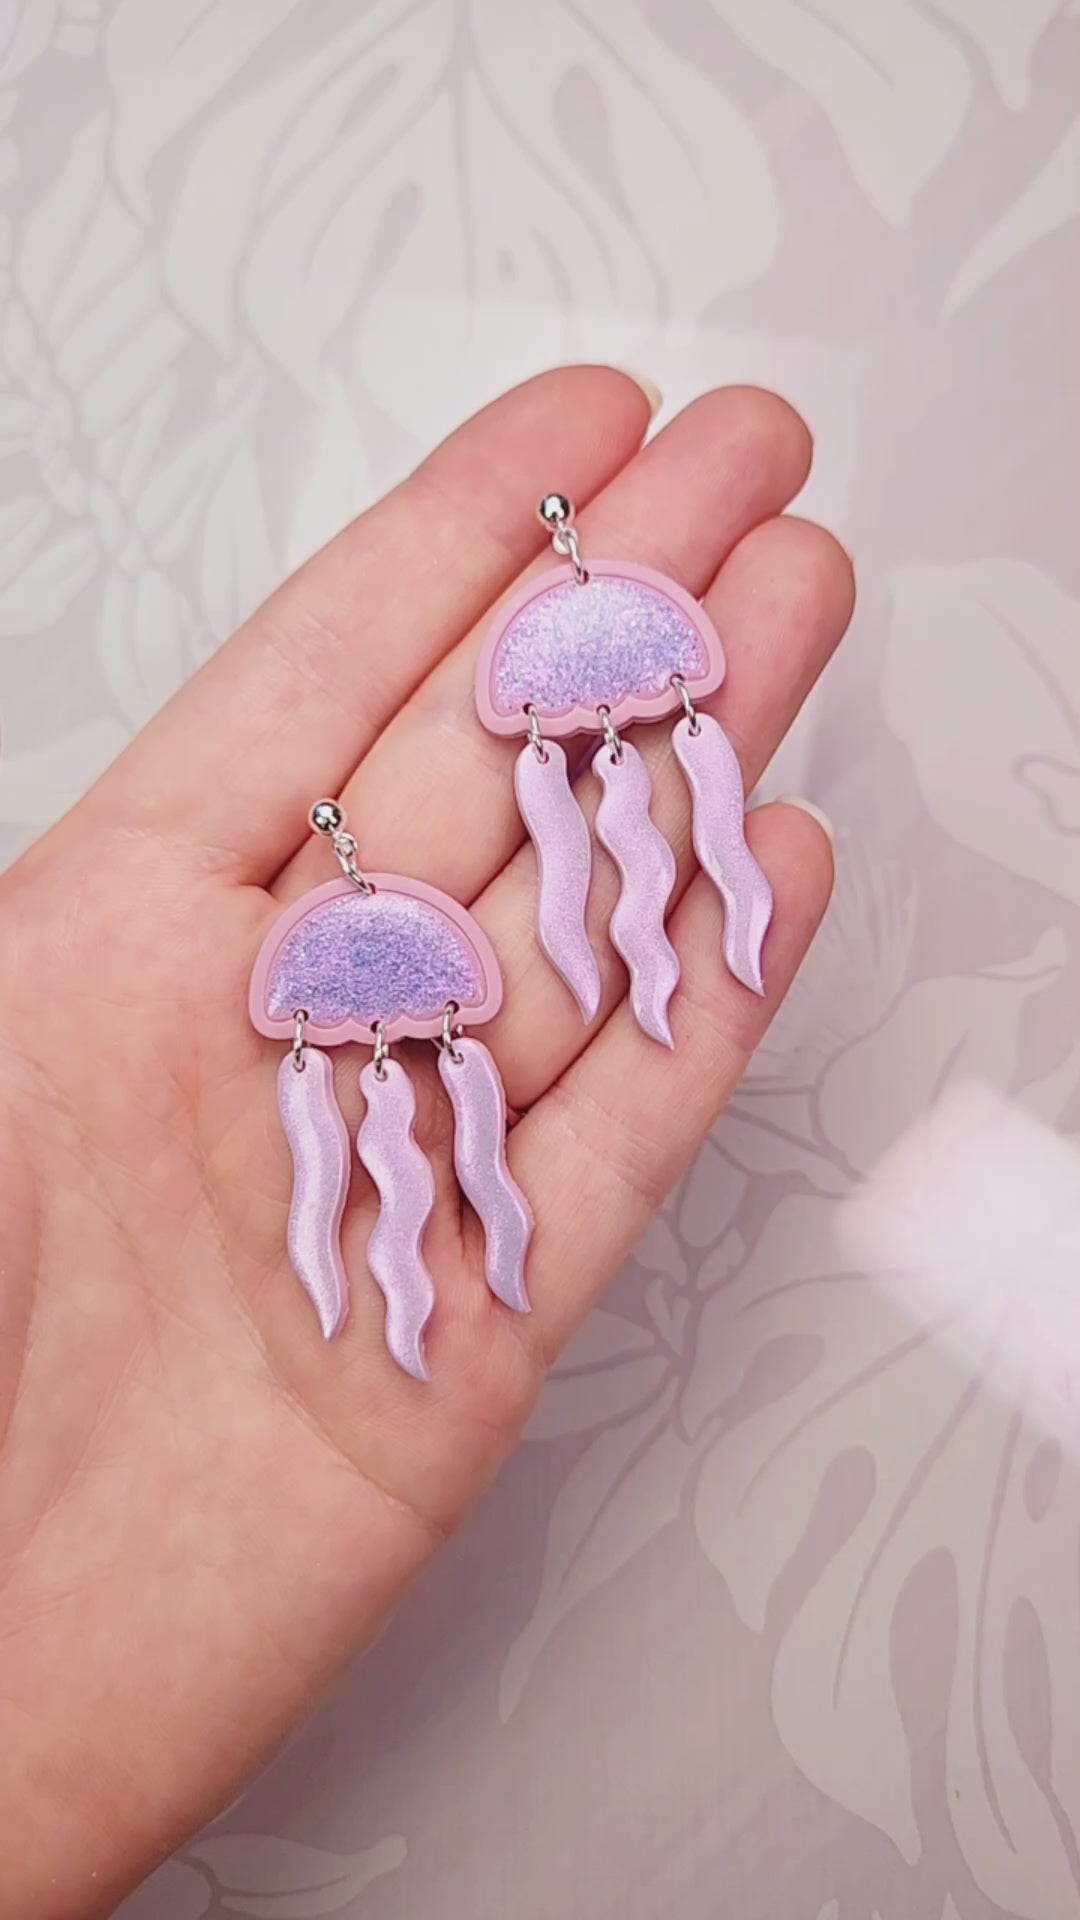 Here is one of my favorite new creations: jellyfish earrings! I've been  getting really into shrink plastic an…